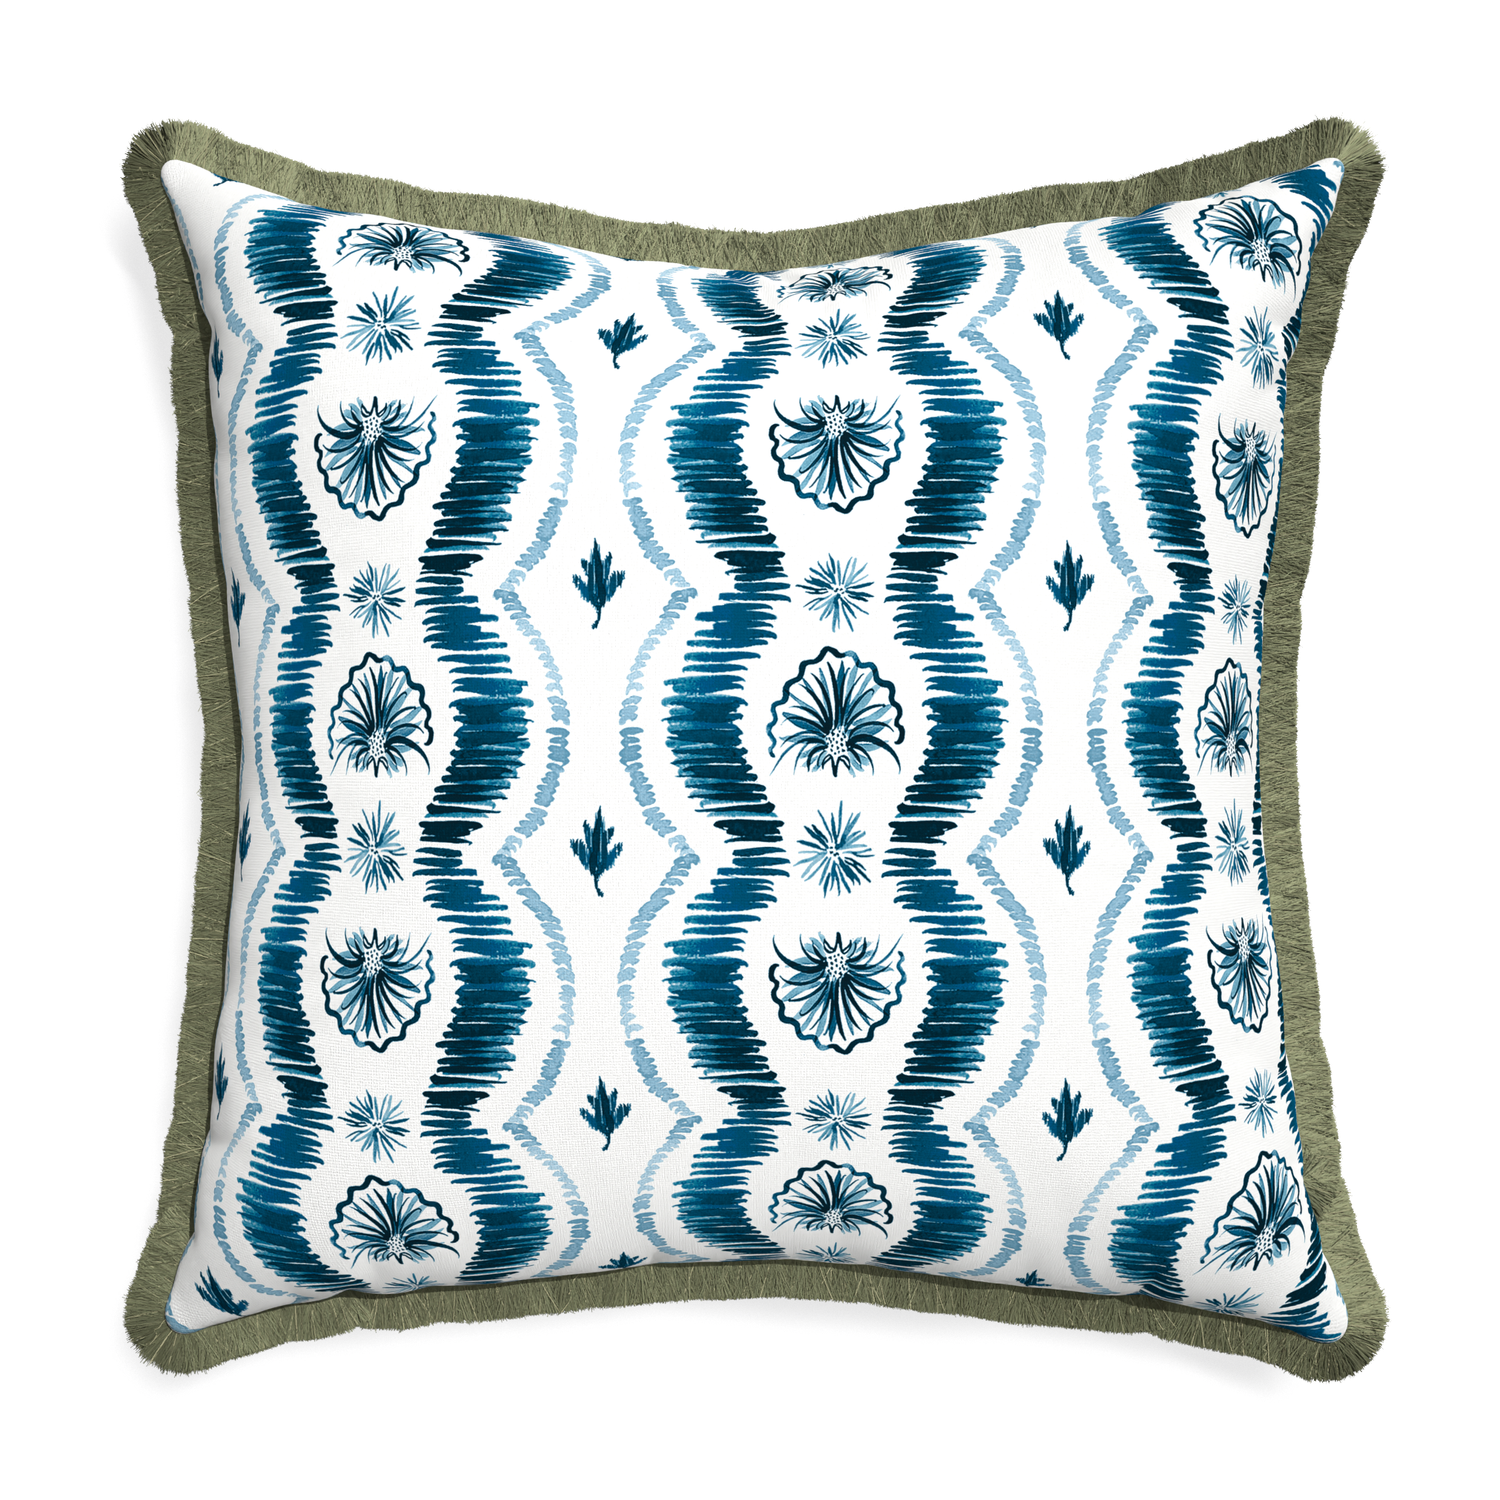 Square Blue Ikat Stripe Pillow with green fringe 